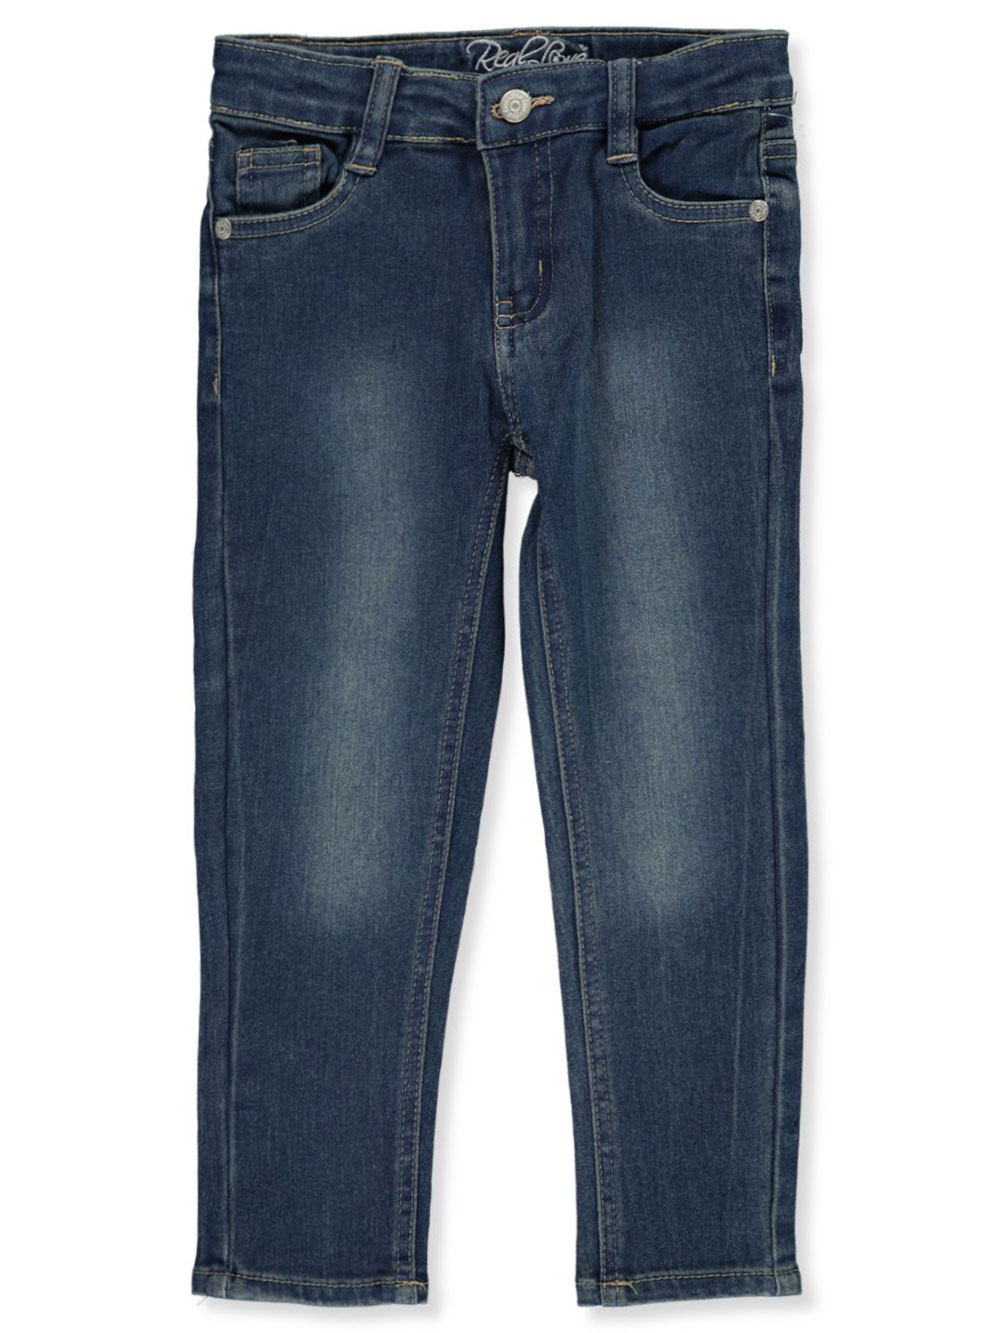 Jeans from Stretch Denim Construction